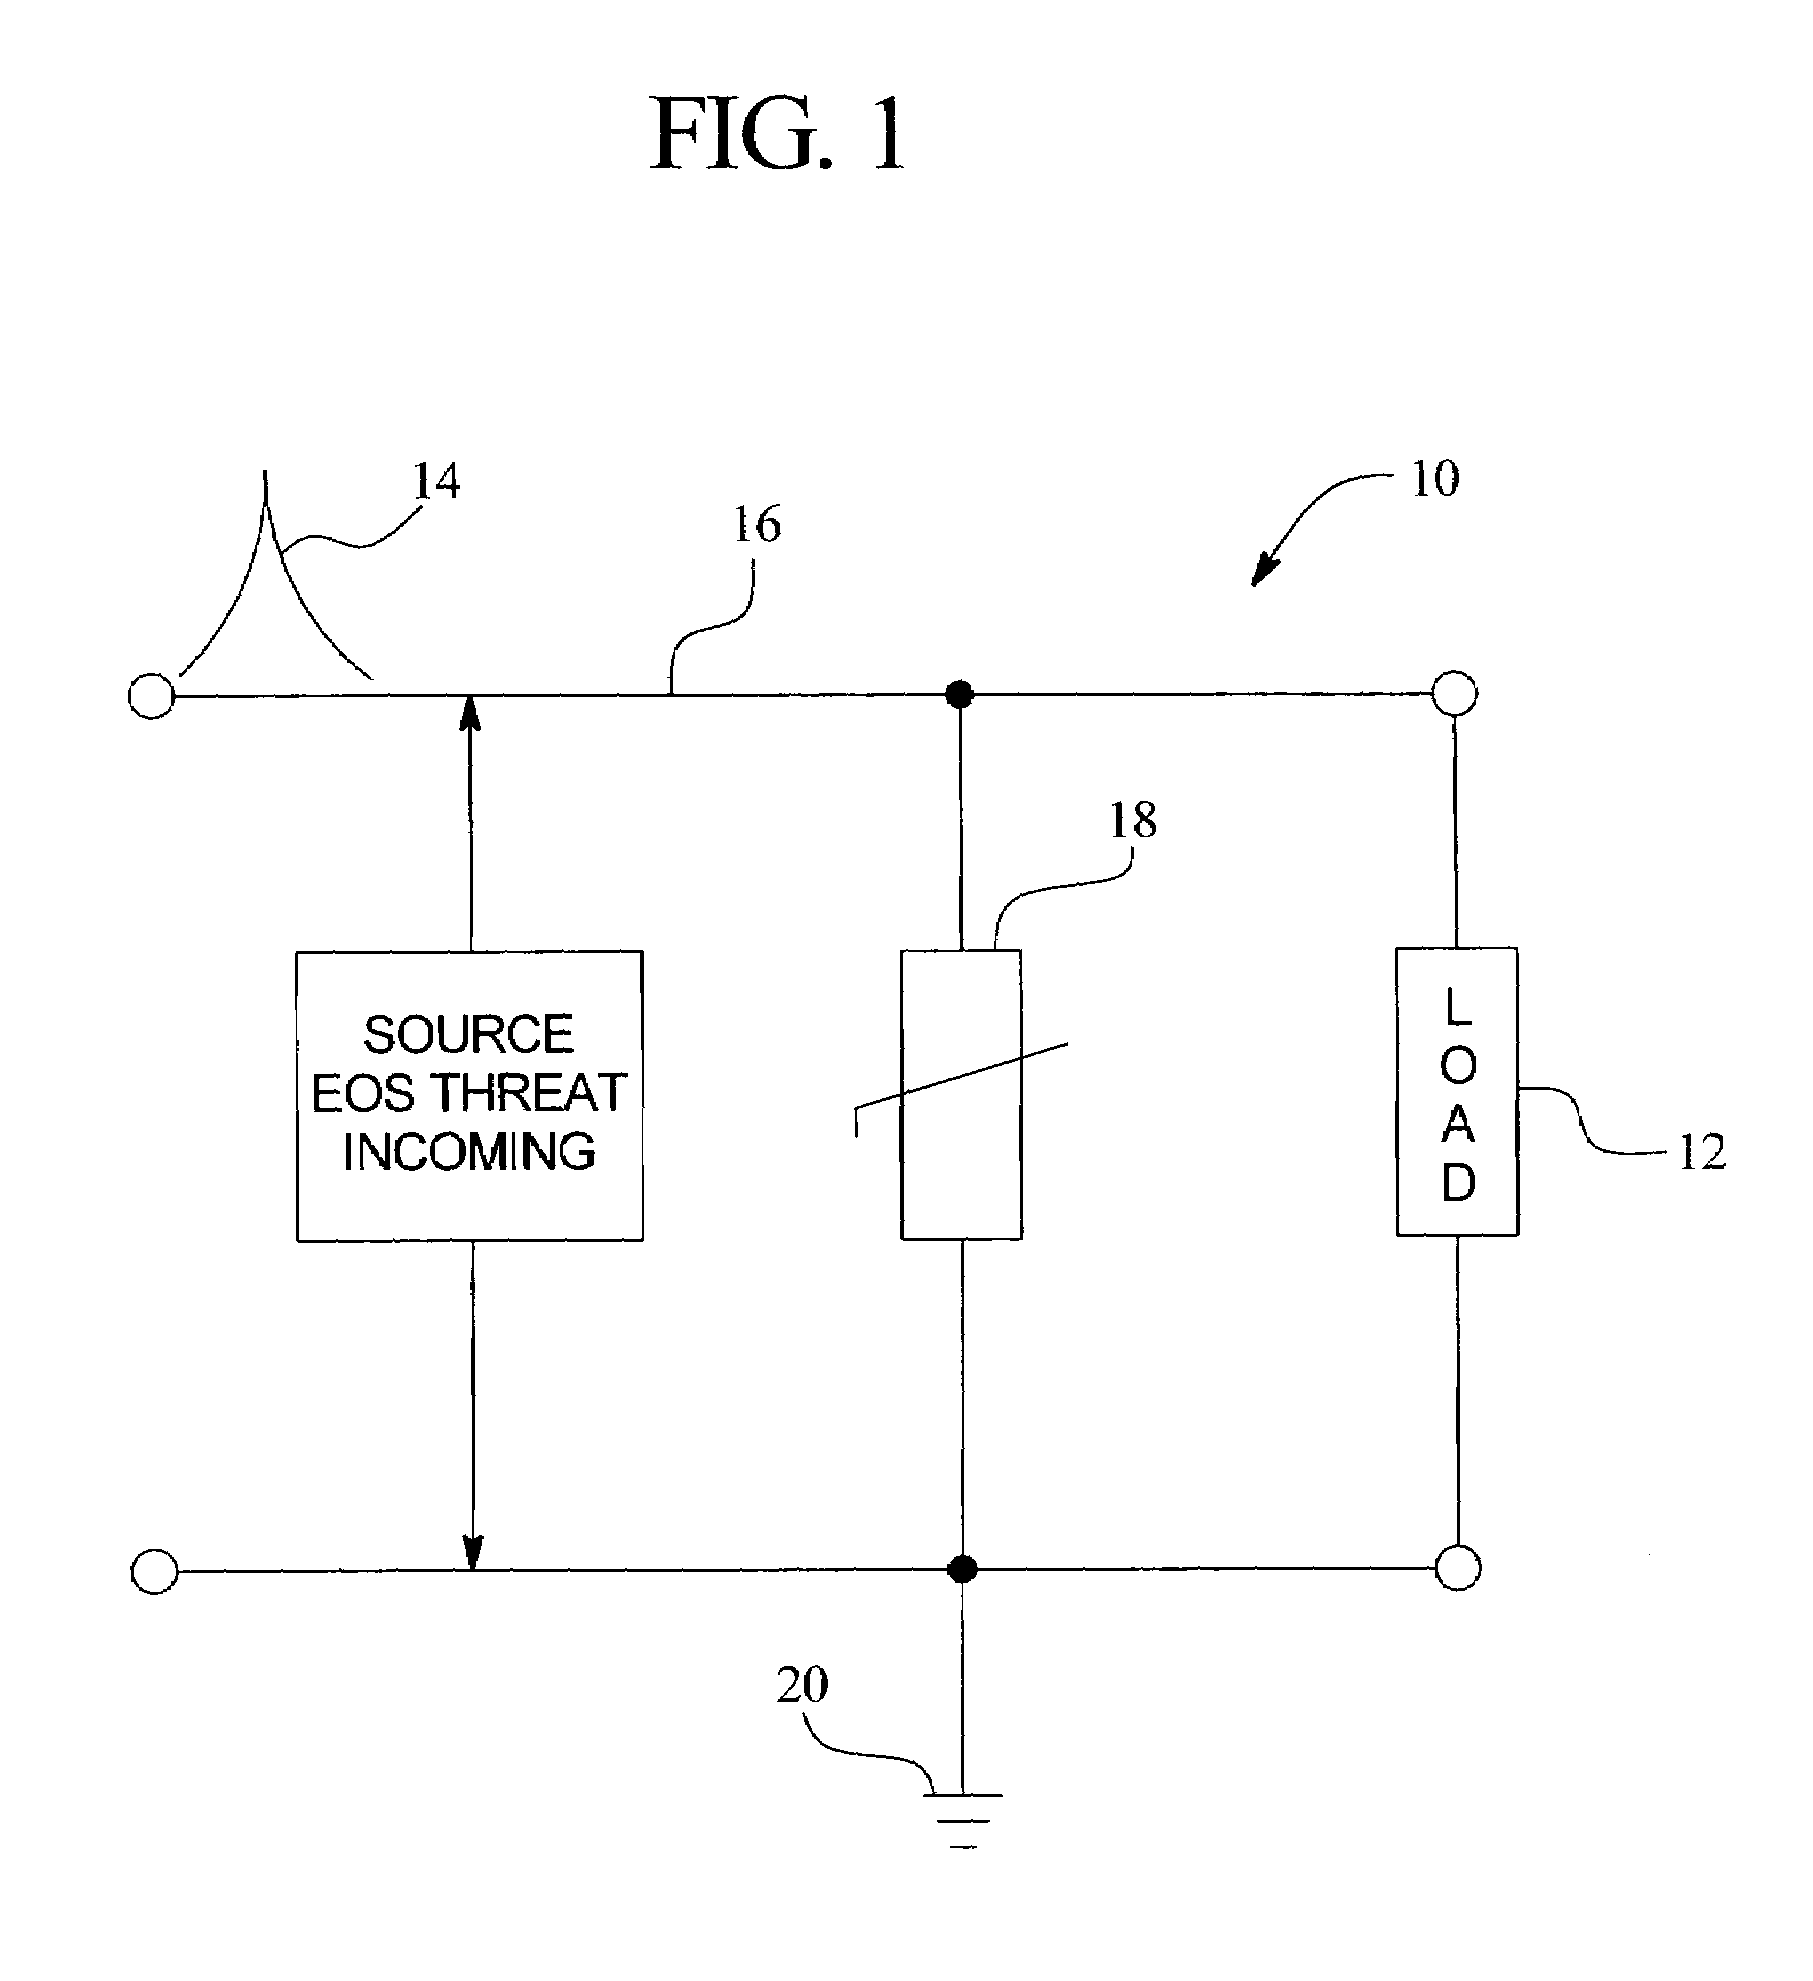 Direct application voltage variable material, components thereof and devices employing same